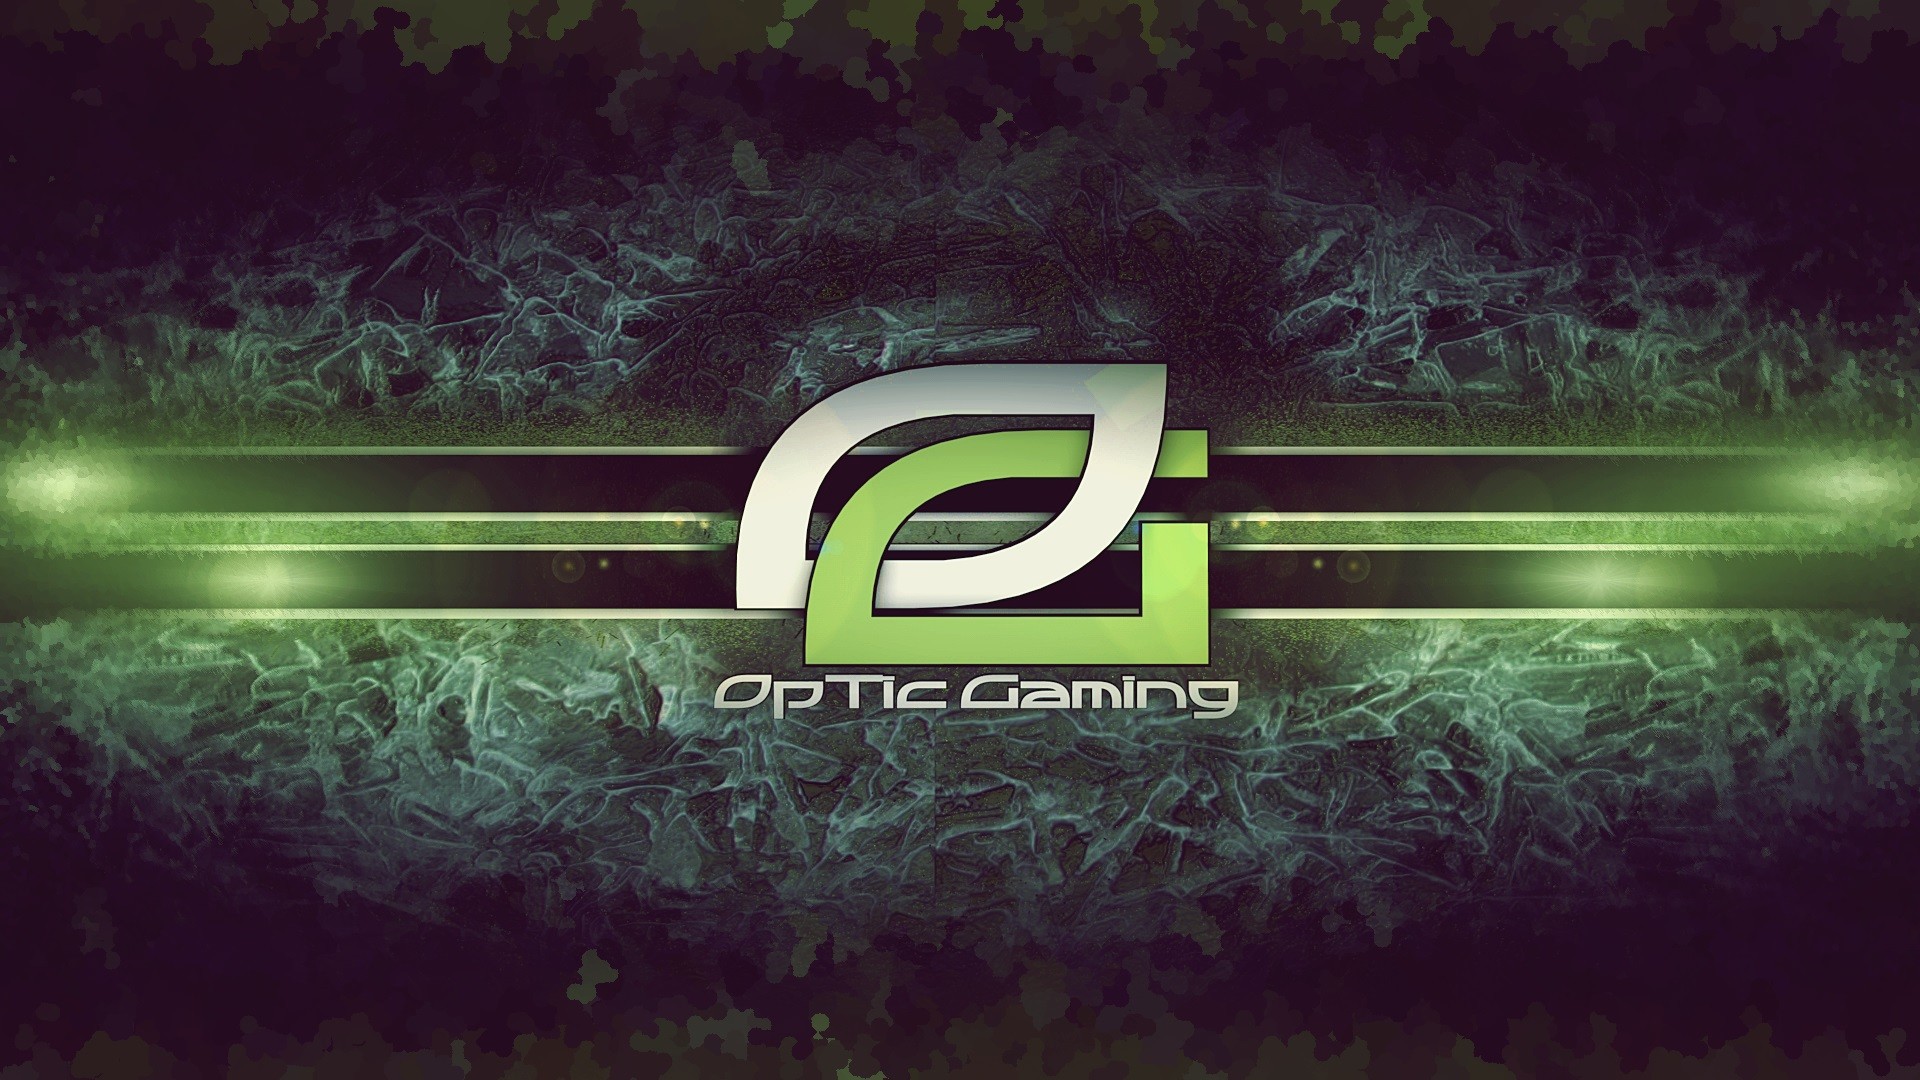 1920x1080 Optic Gaming Wallpaper Optic Gaming Wallpaper by